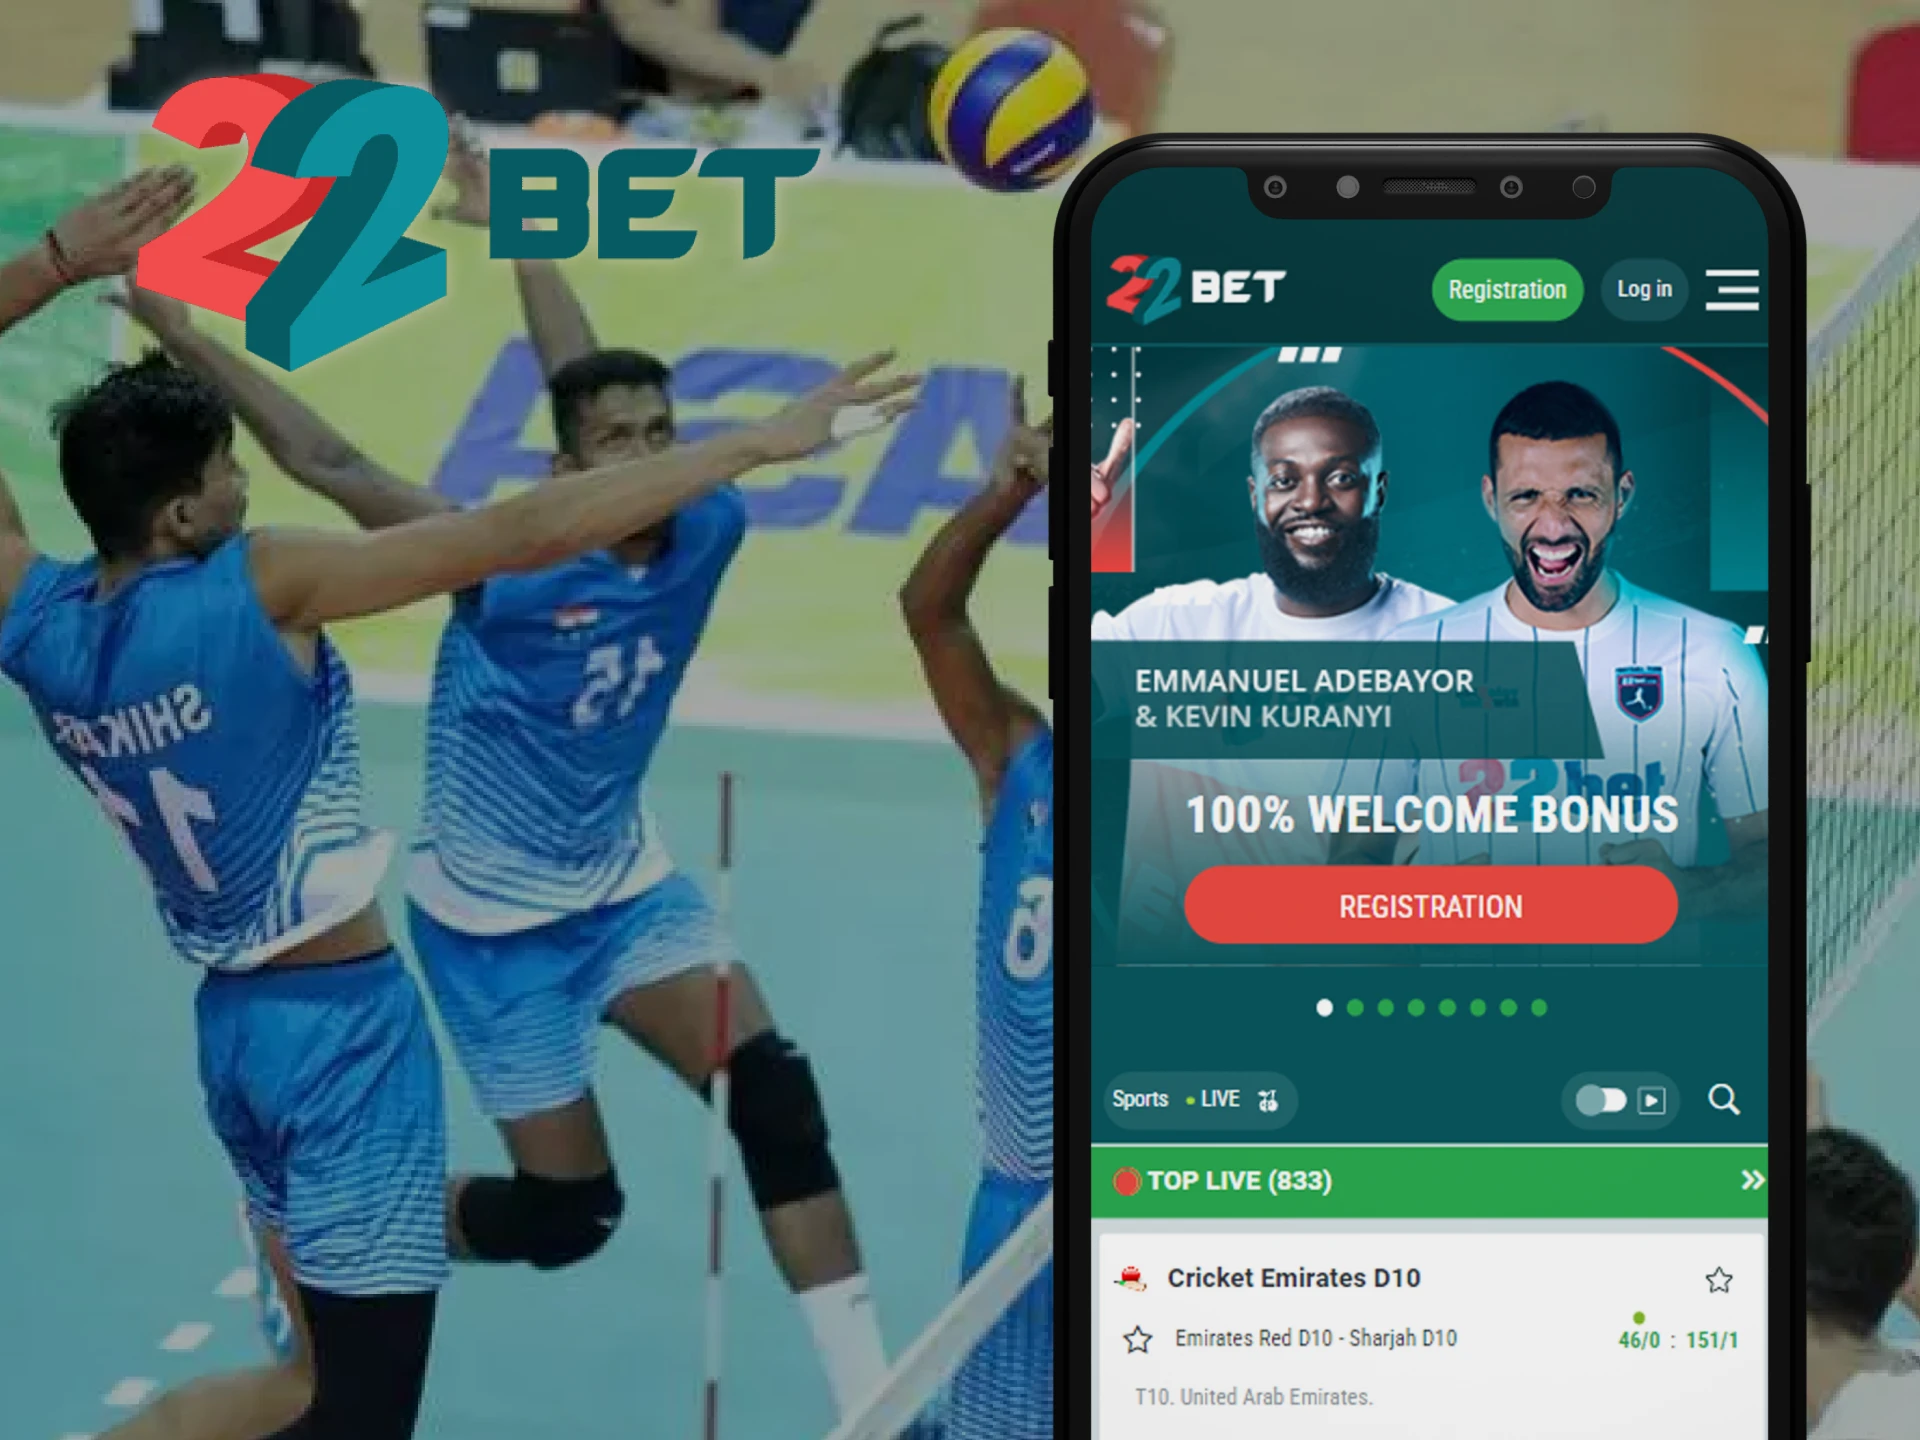 The 22bet app is a convenient way to bet on sports.